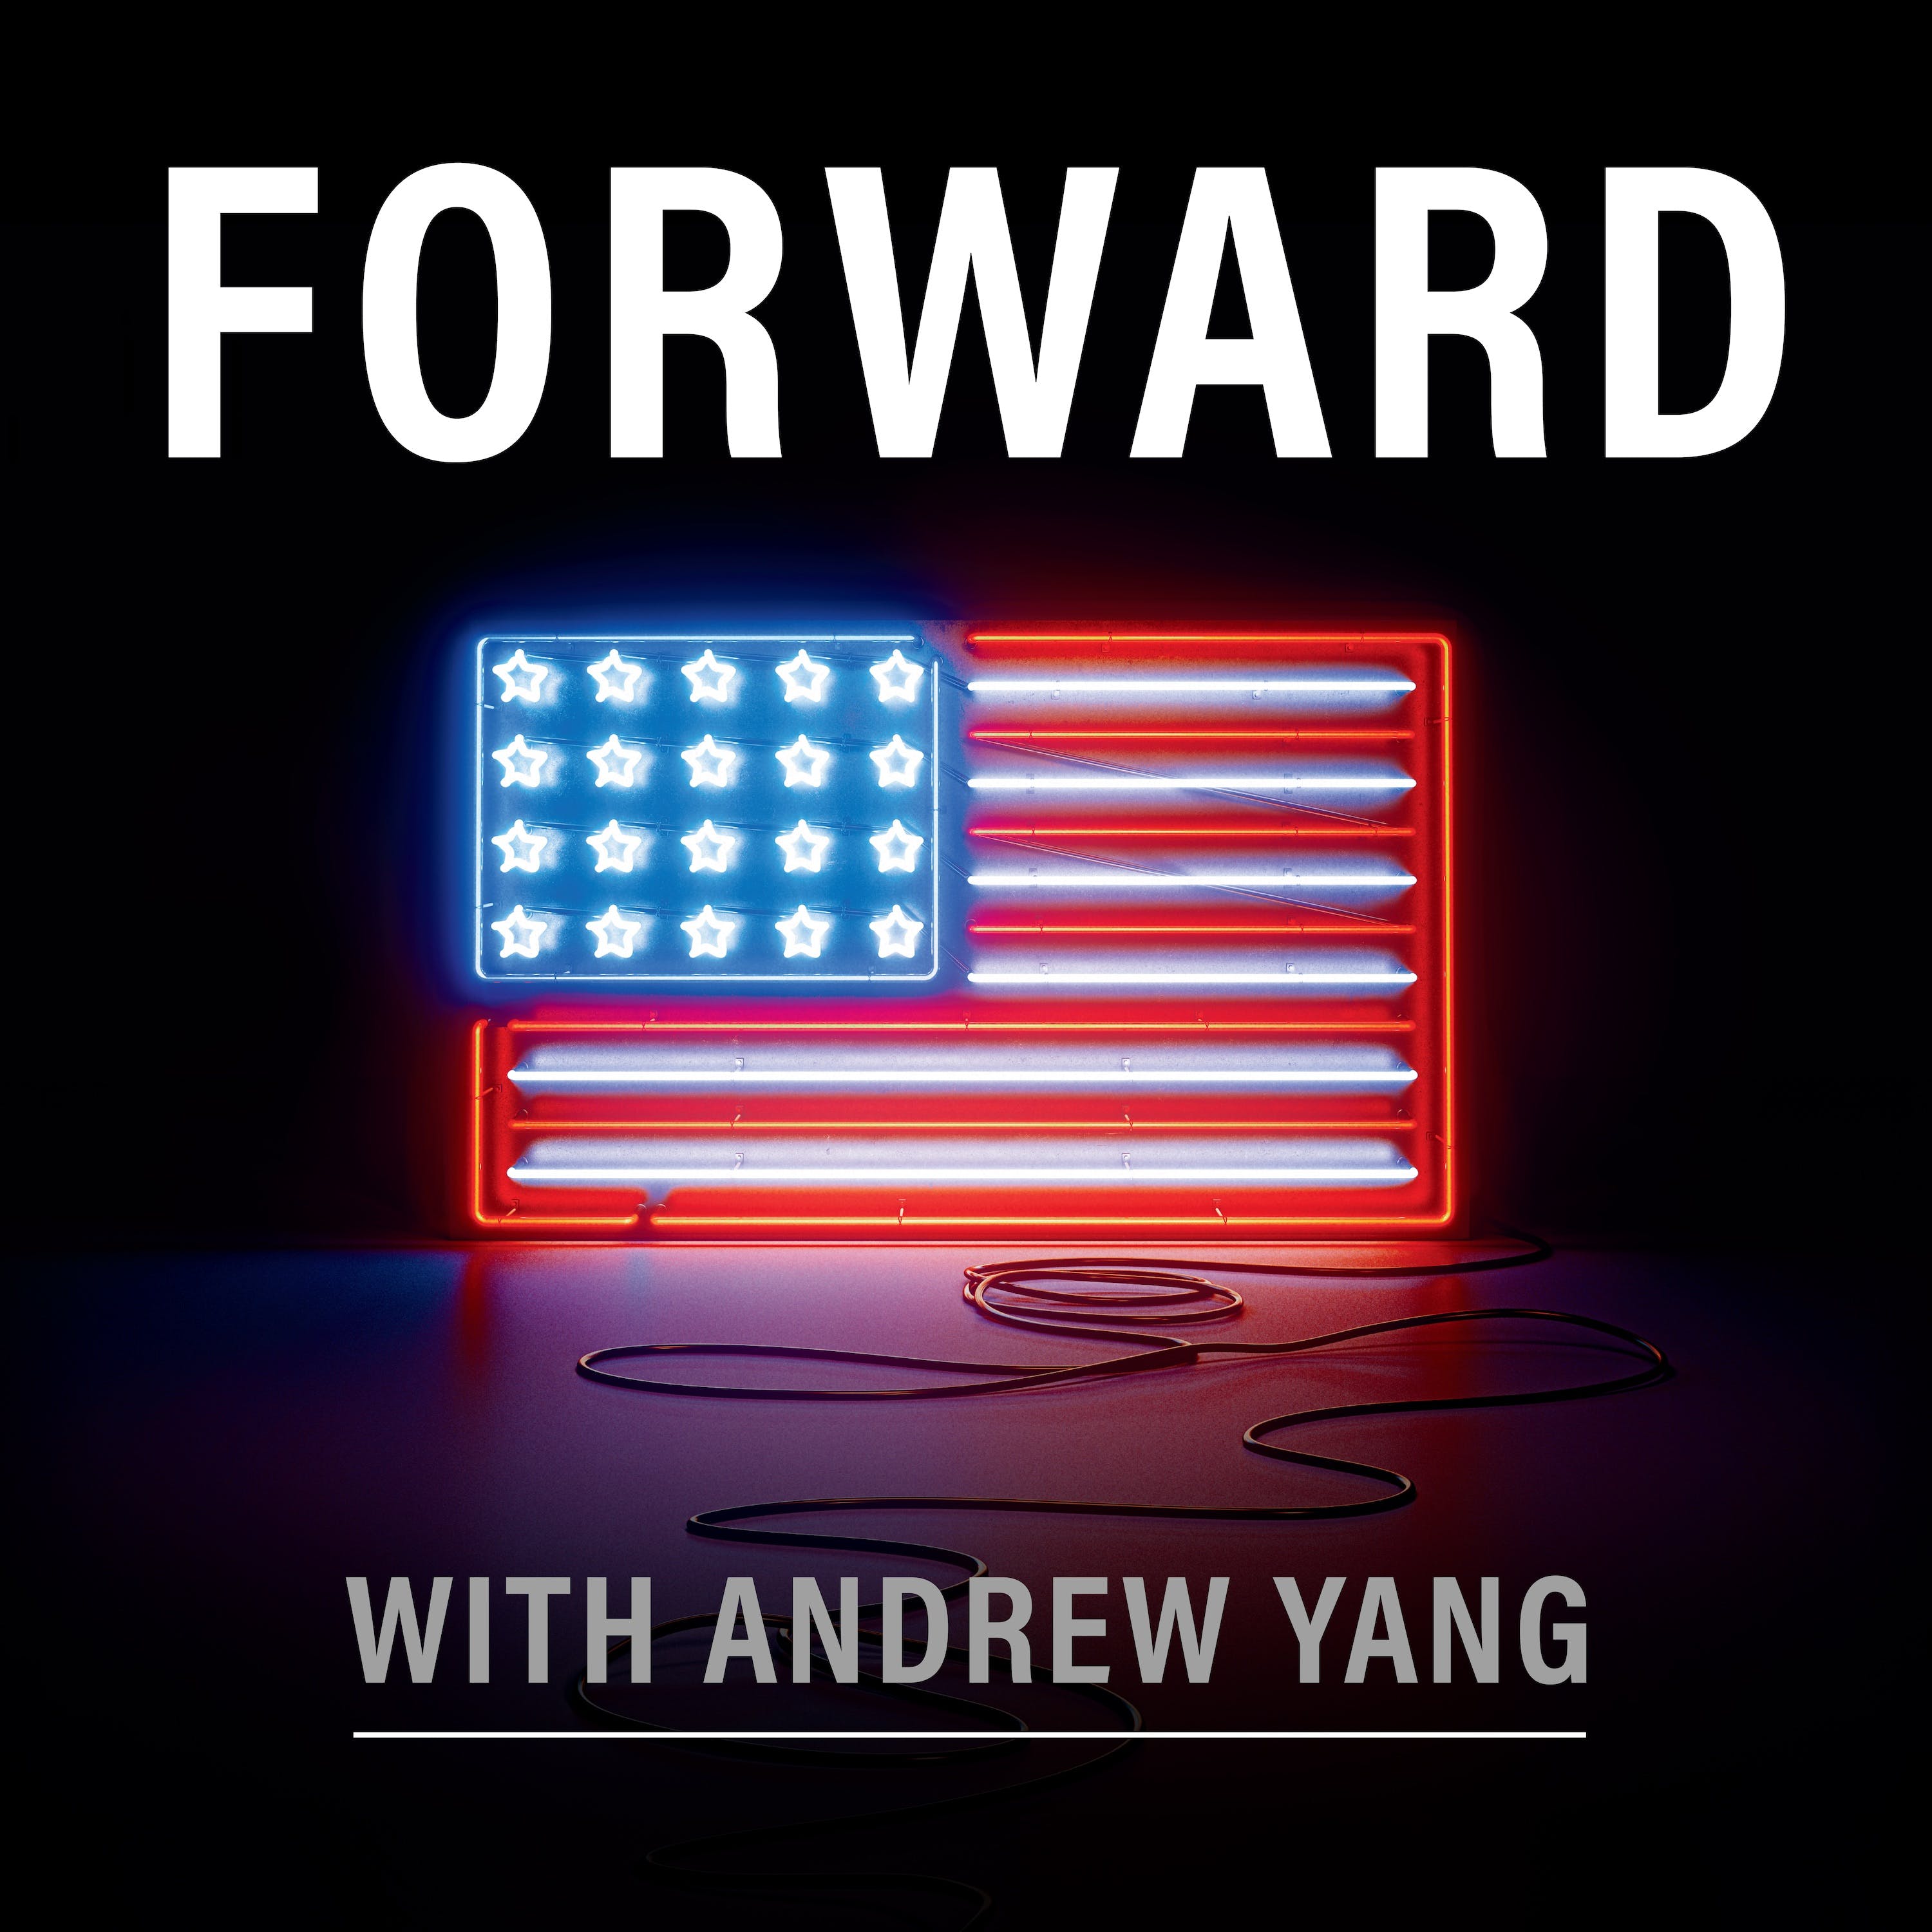 Andrew Yang Categorizes the Canadian Trucker Convoy as an 'Anti-Government' Protest